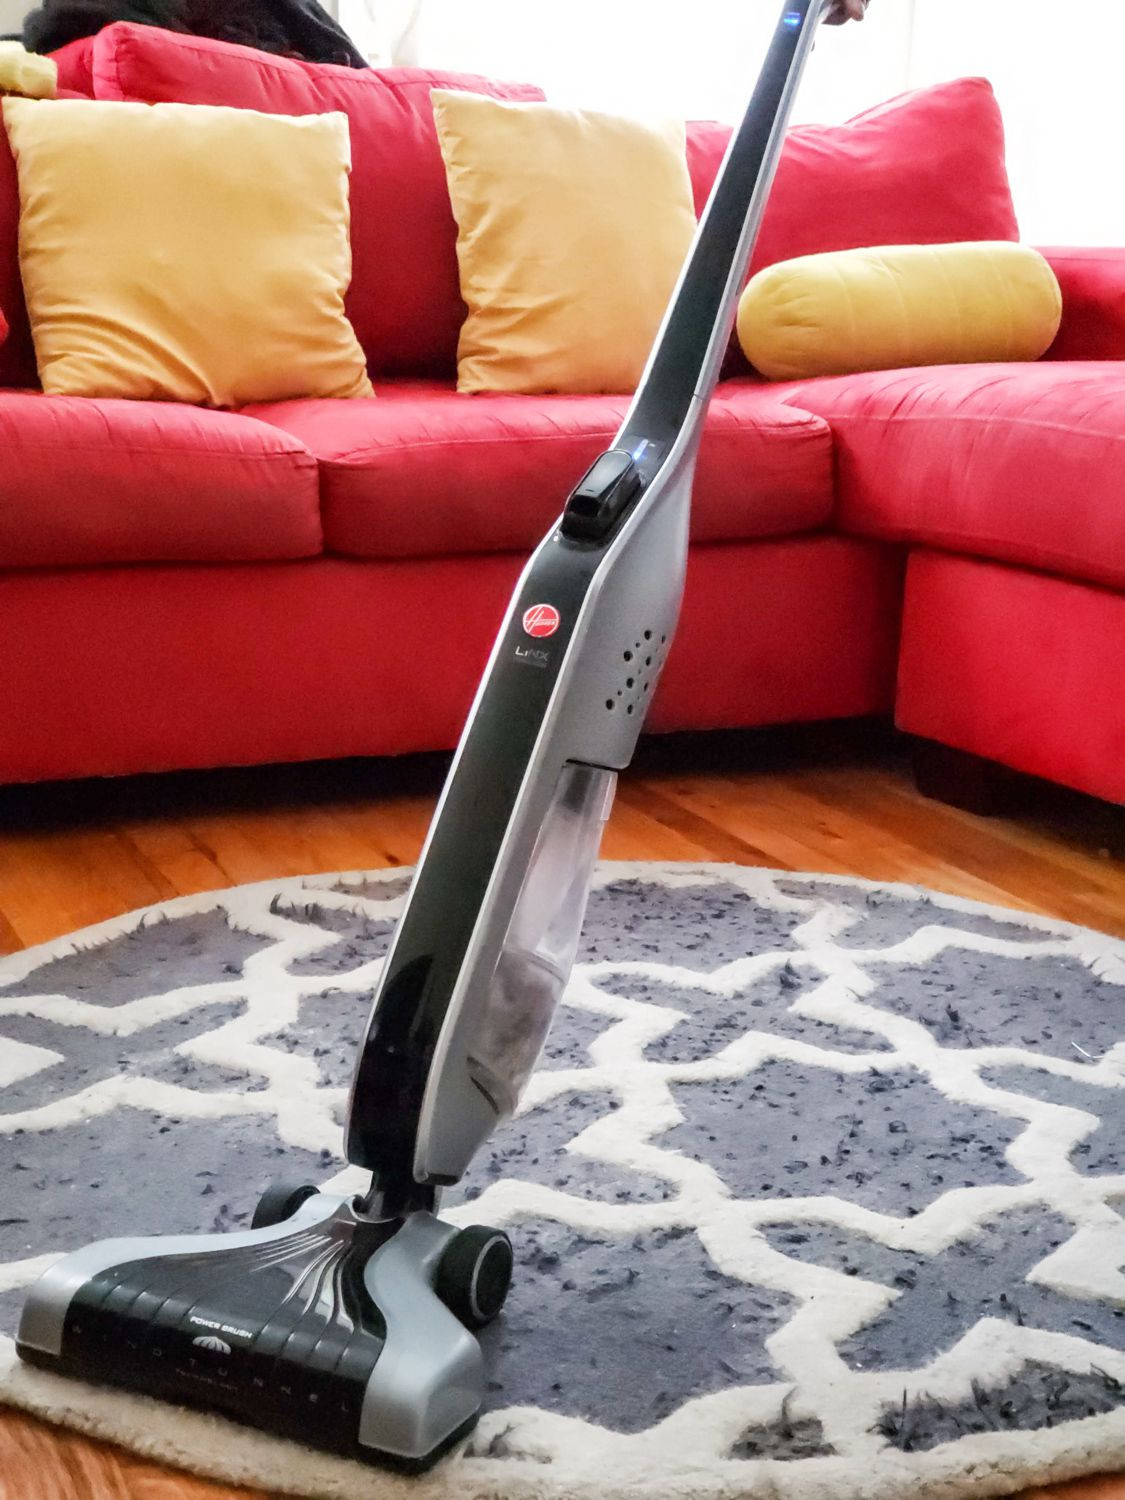 hardwood floor vacuum ratings of the 7 best cordless stick vacuums to buy in 2018 intended for 4135822 2 5bbfa3c0c9e77c0052b8b78b